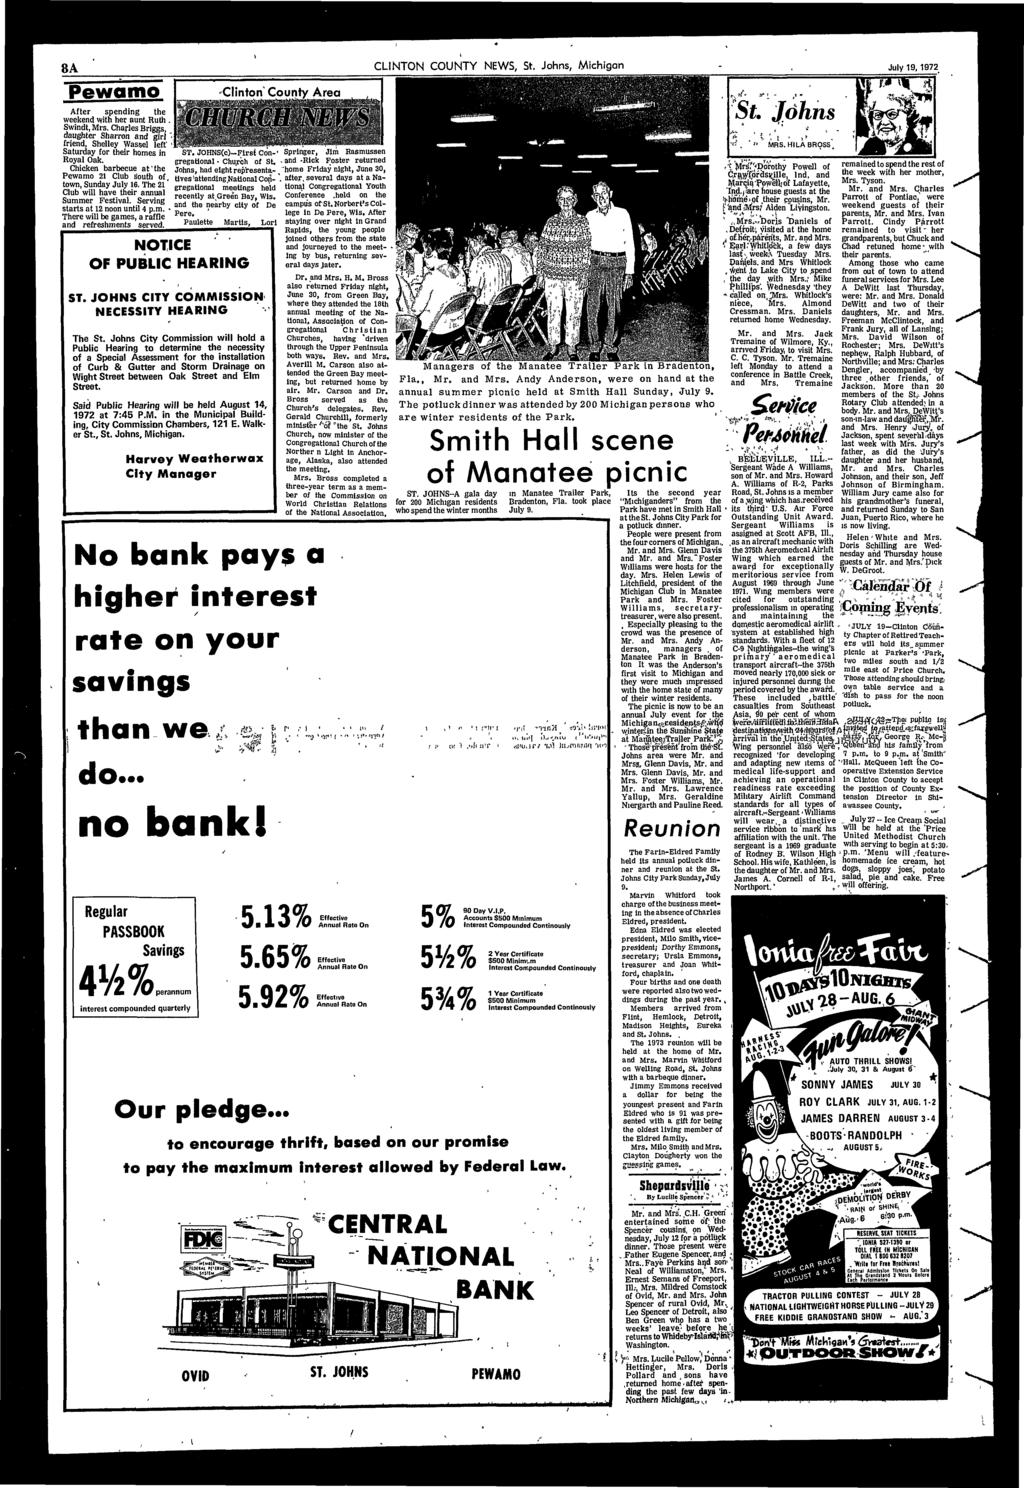 8A CLINTON COUNTY NEWS, St. Johns, Mchgan July 19,1972 Pewamo After spendng the weekend wth hen aunt Ruth. Swndt, Mrs.